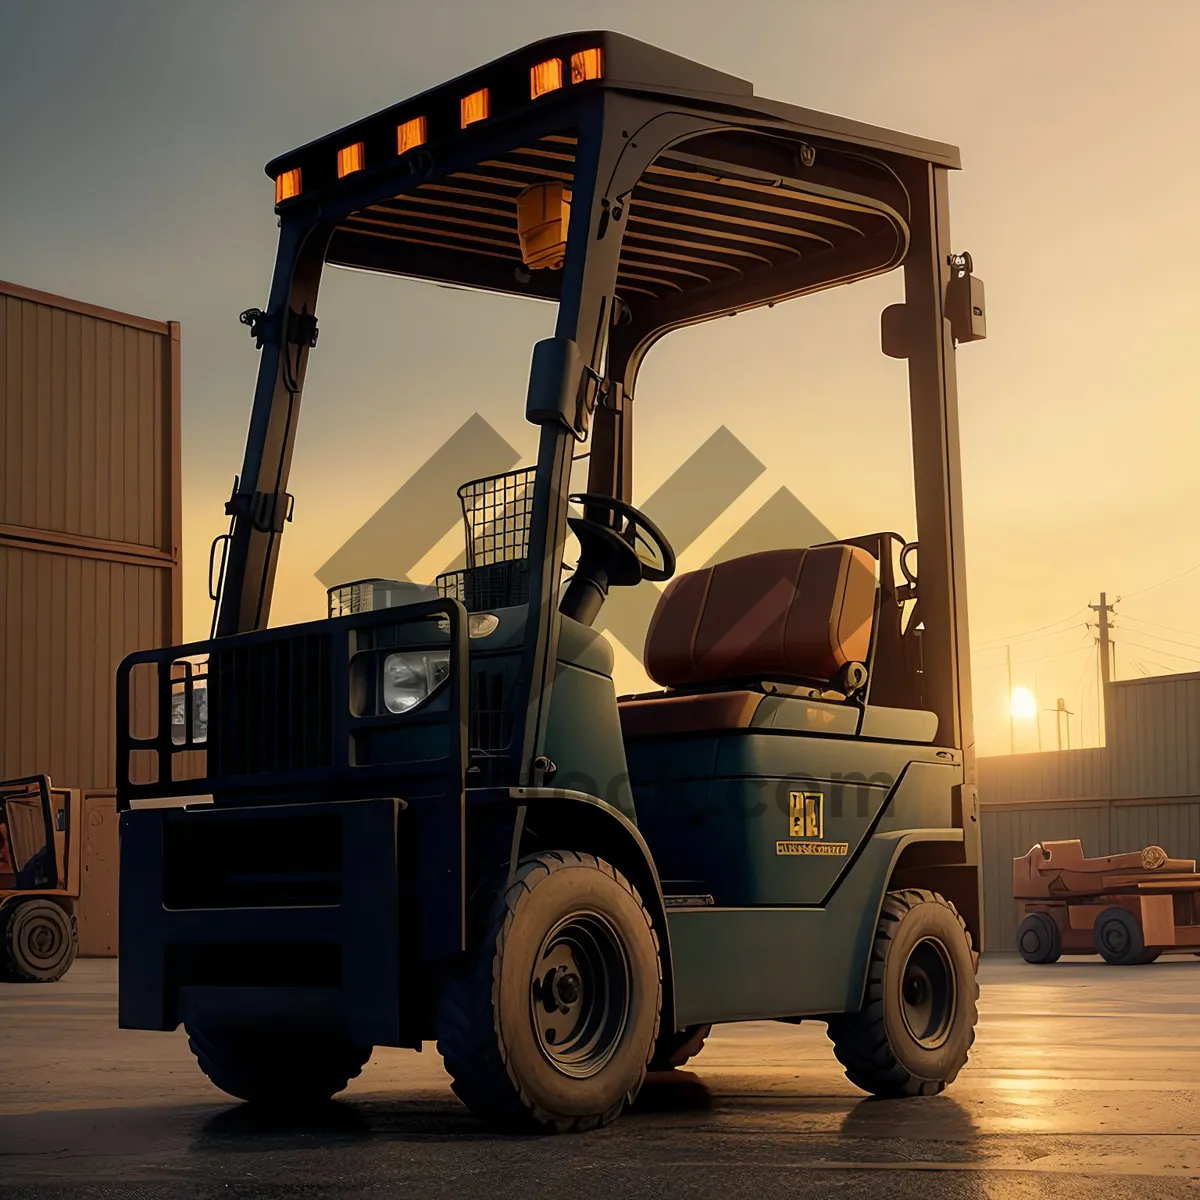 Picture of Heavy-duty Forklift Truck in Warehouse